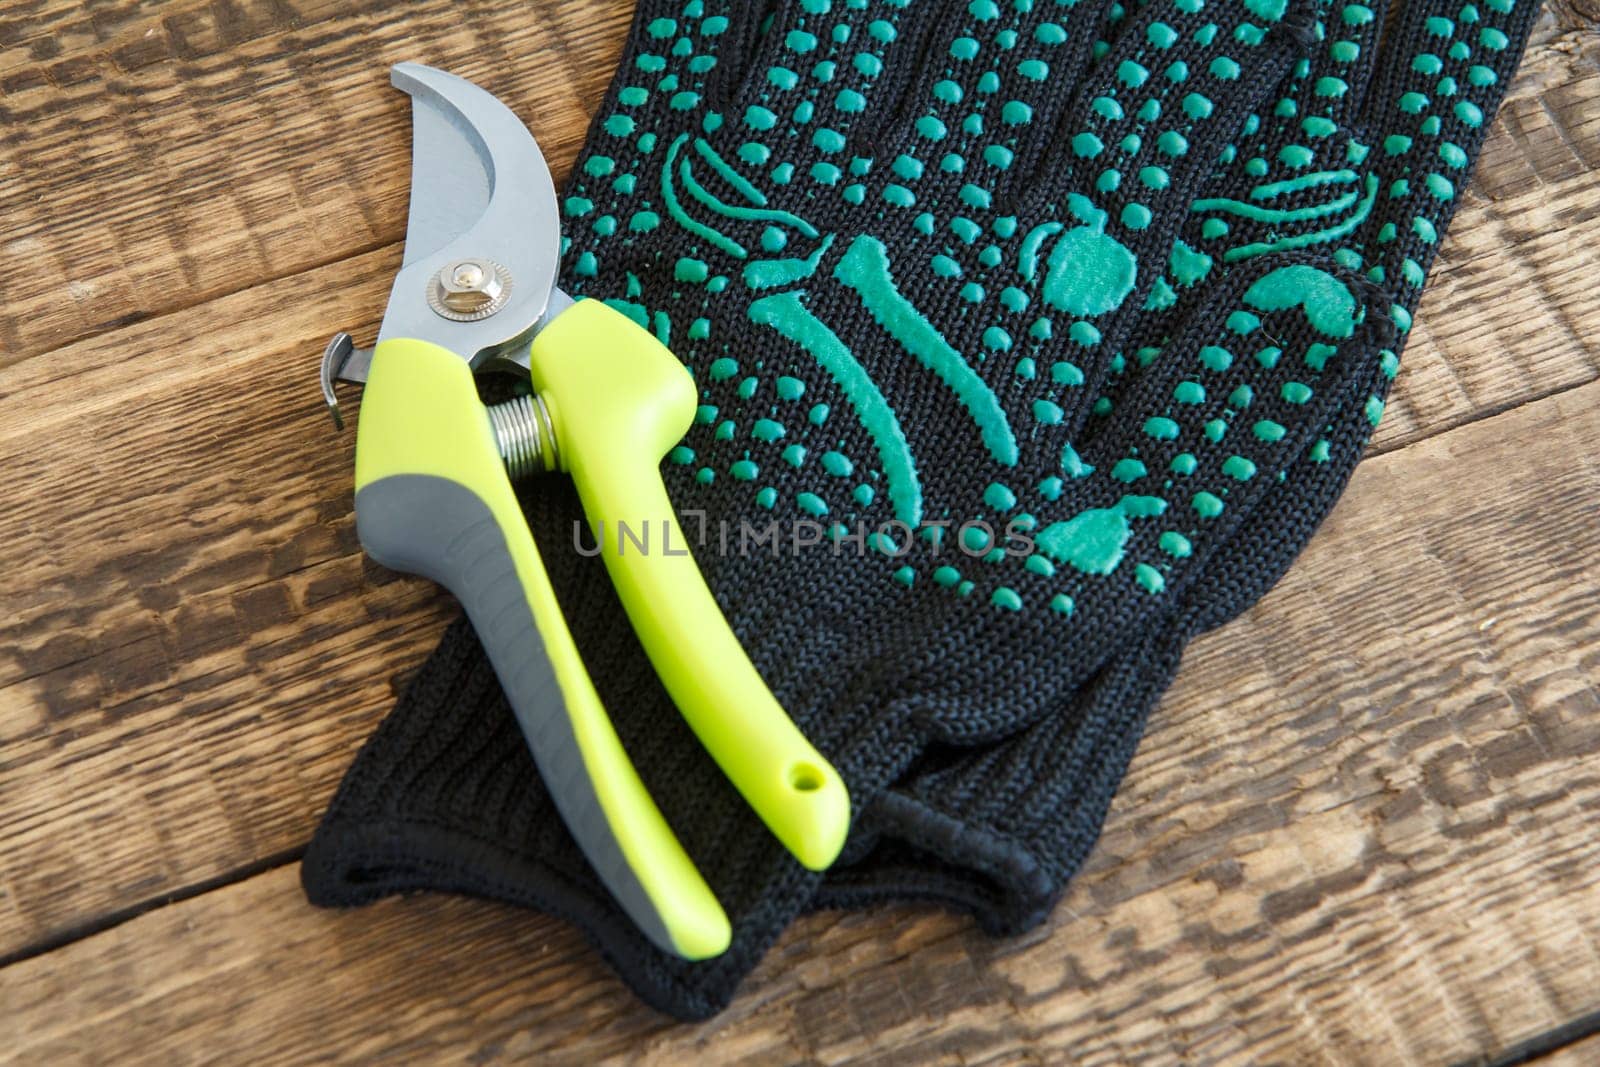 Pair of garden black gloves and pruner on wooden board. Garden tools and equipment.